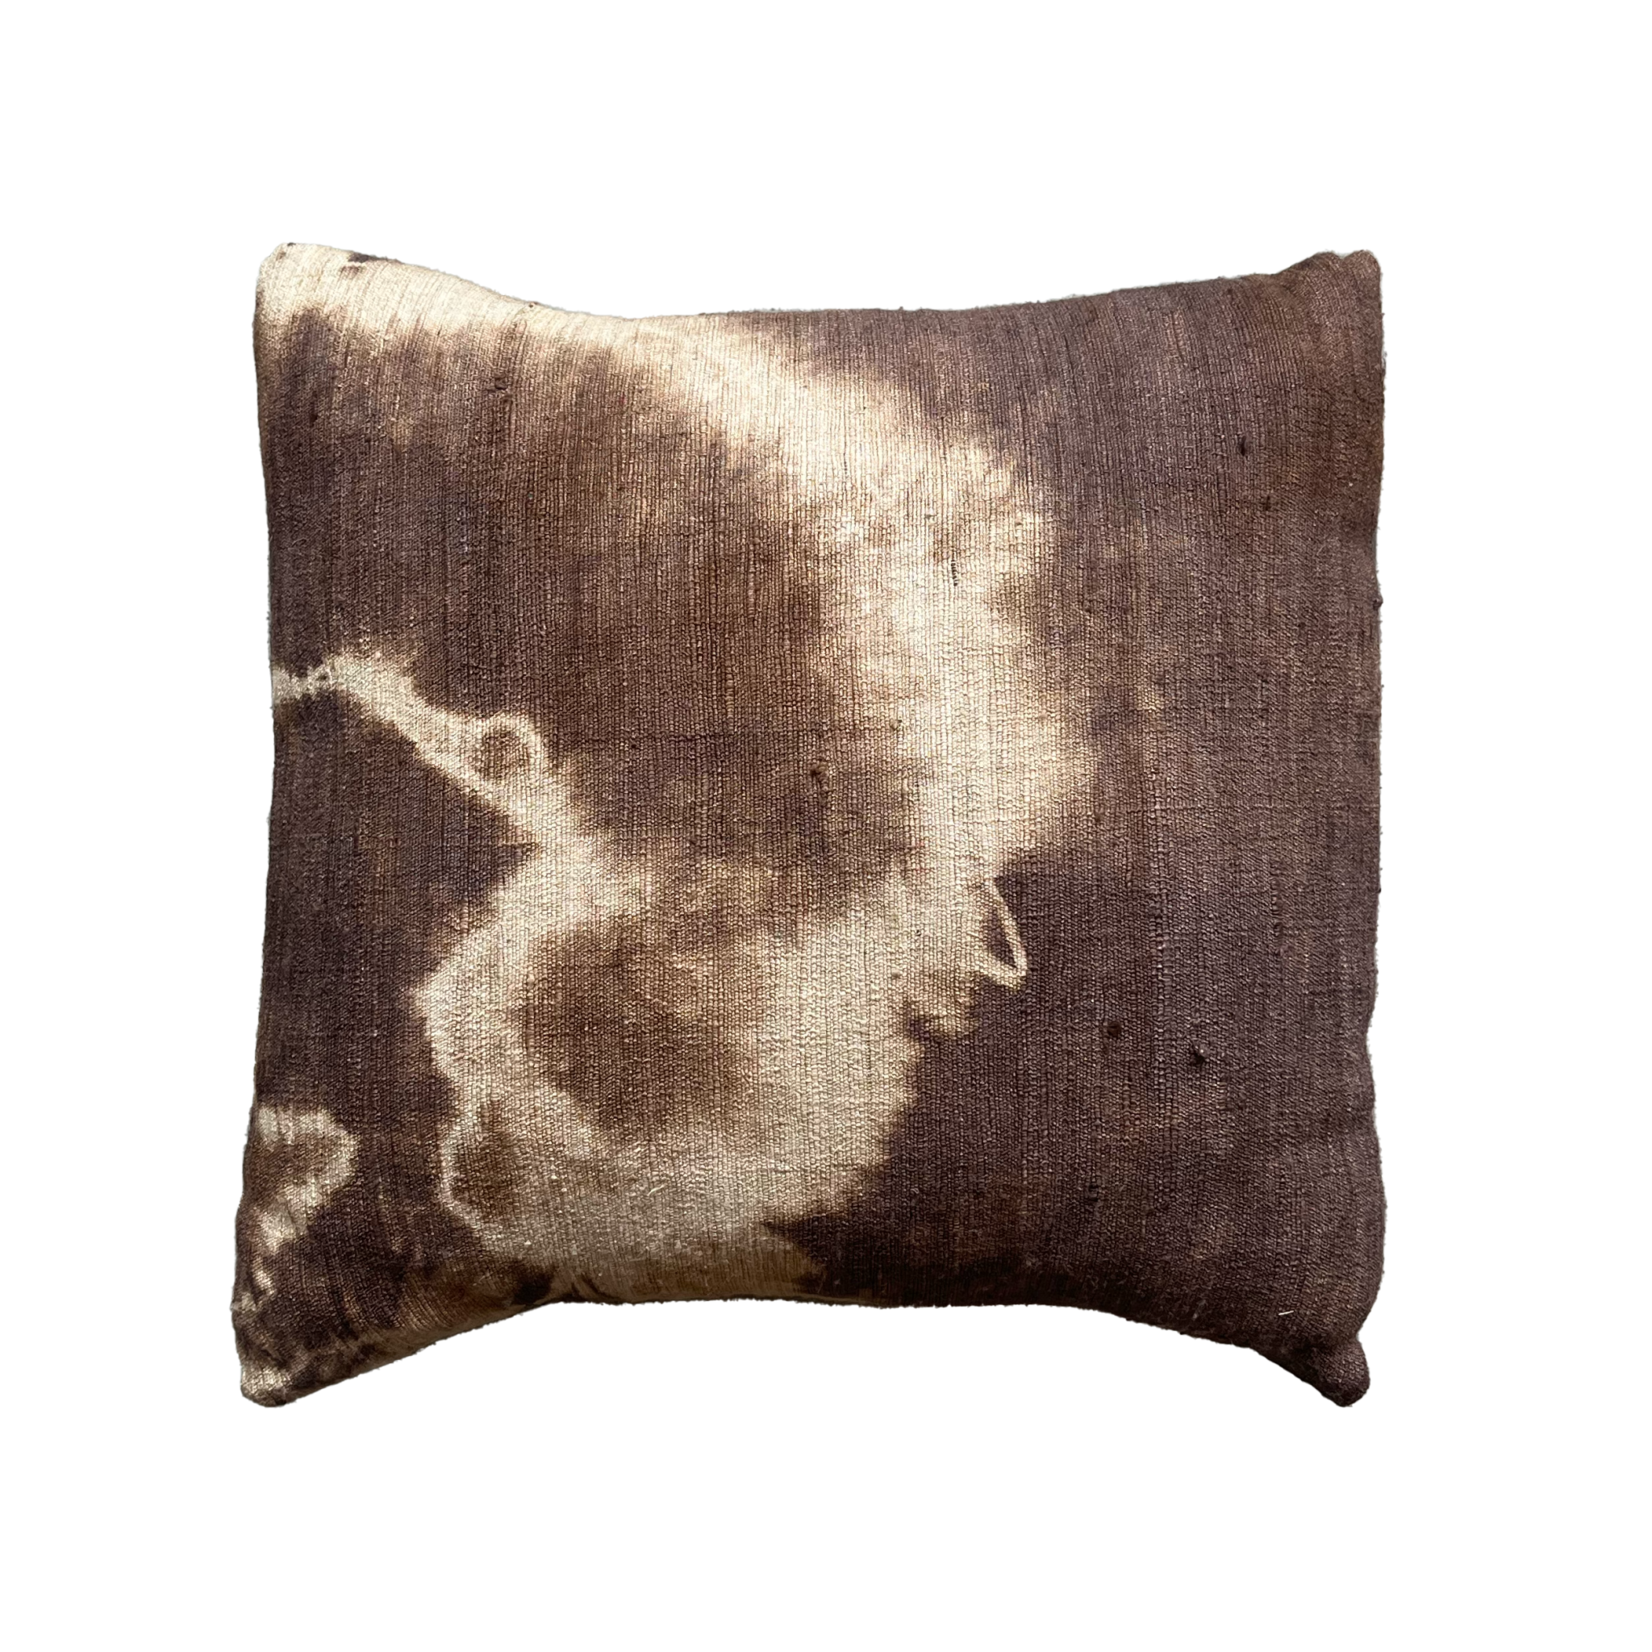 Jess Feury Jess Feury - Hand-Dyed Silk Pillow